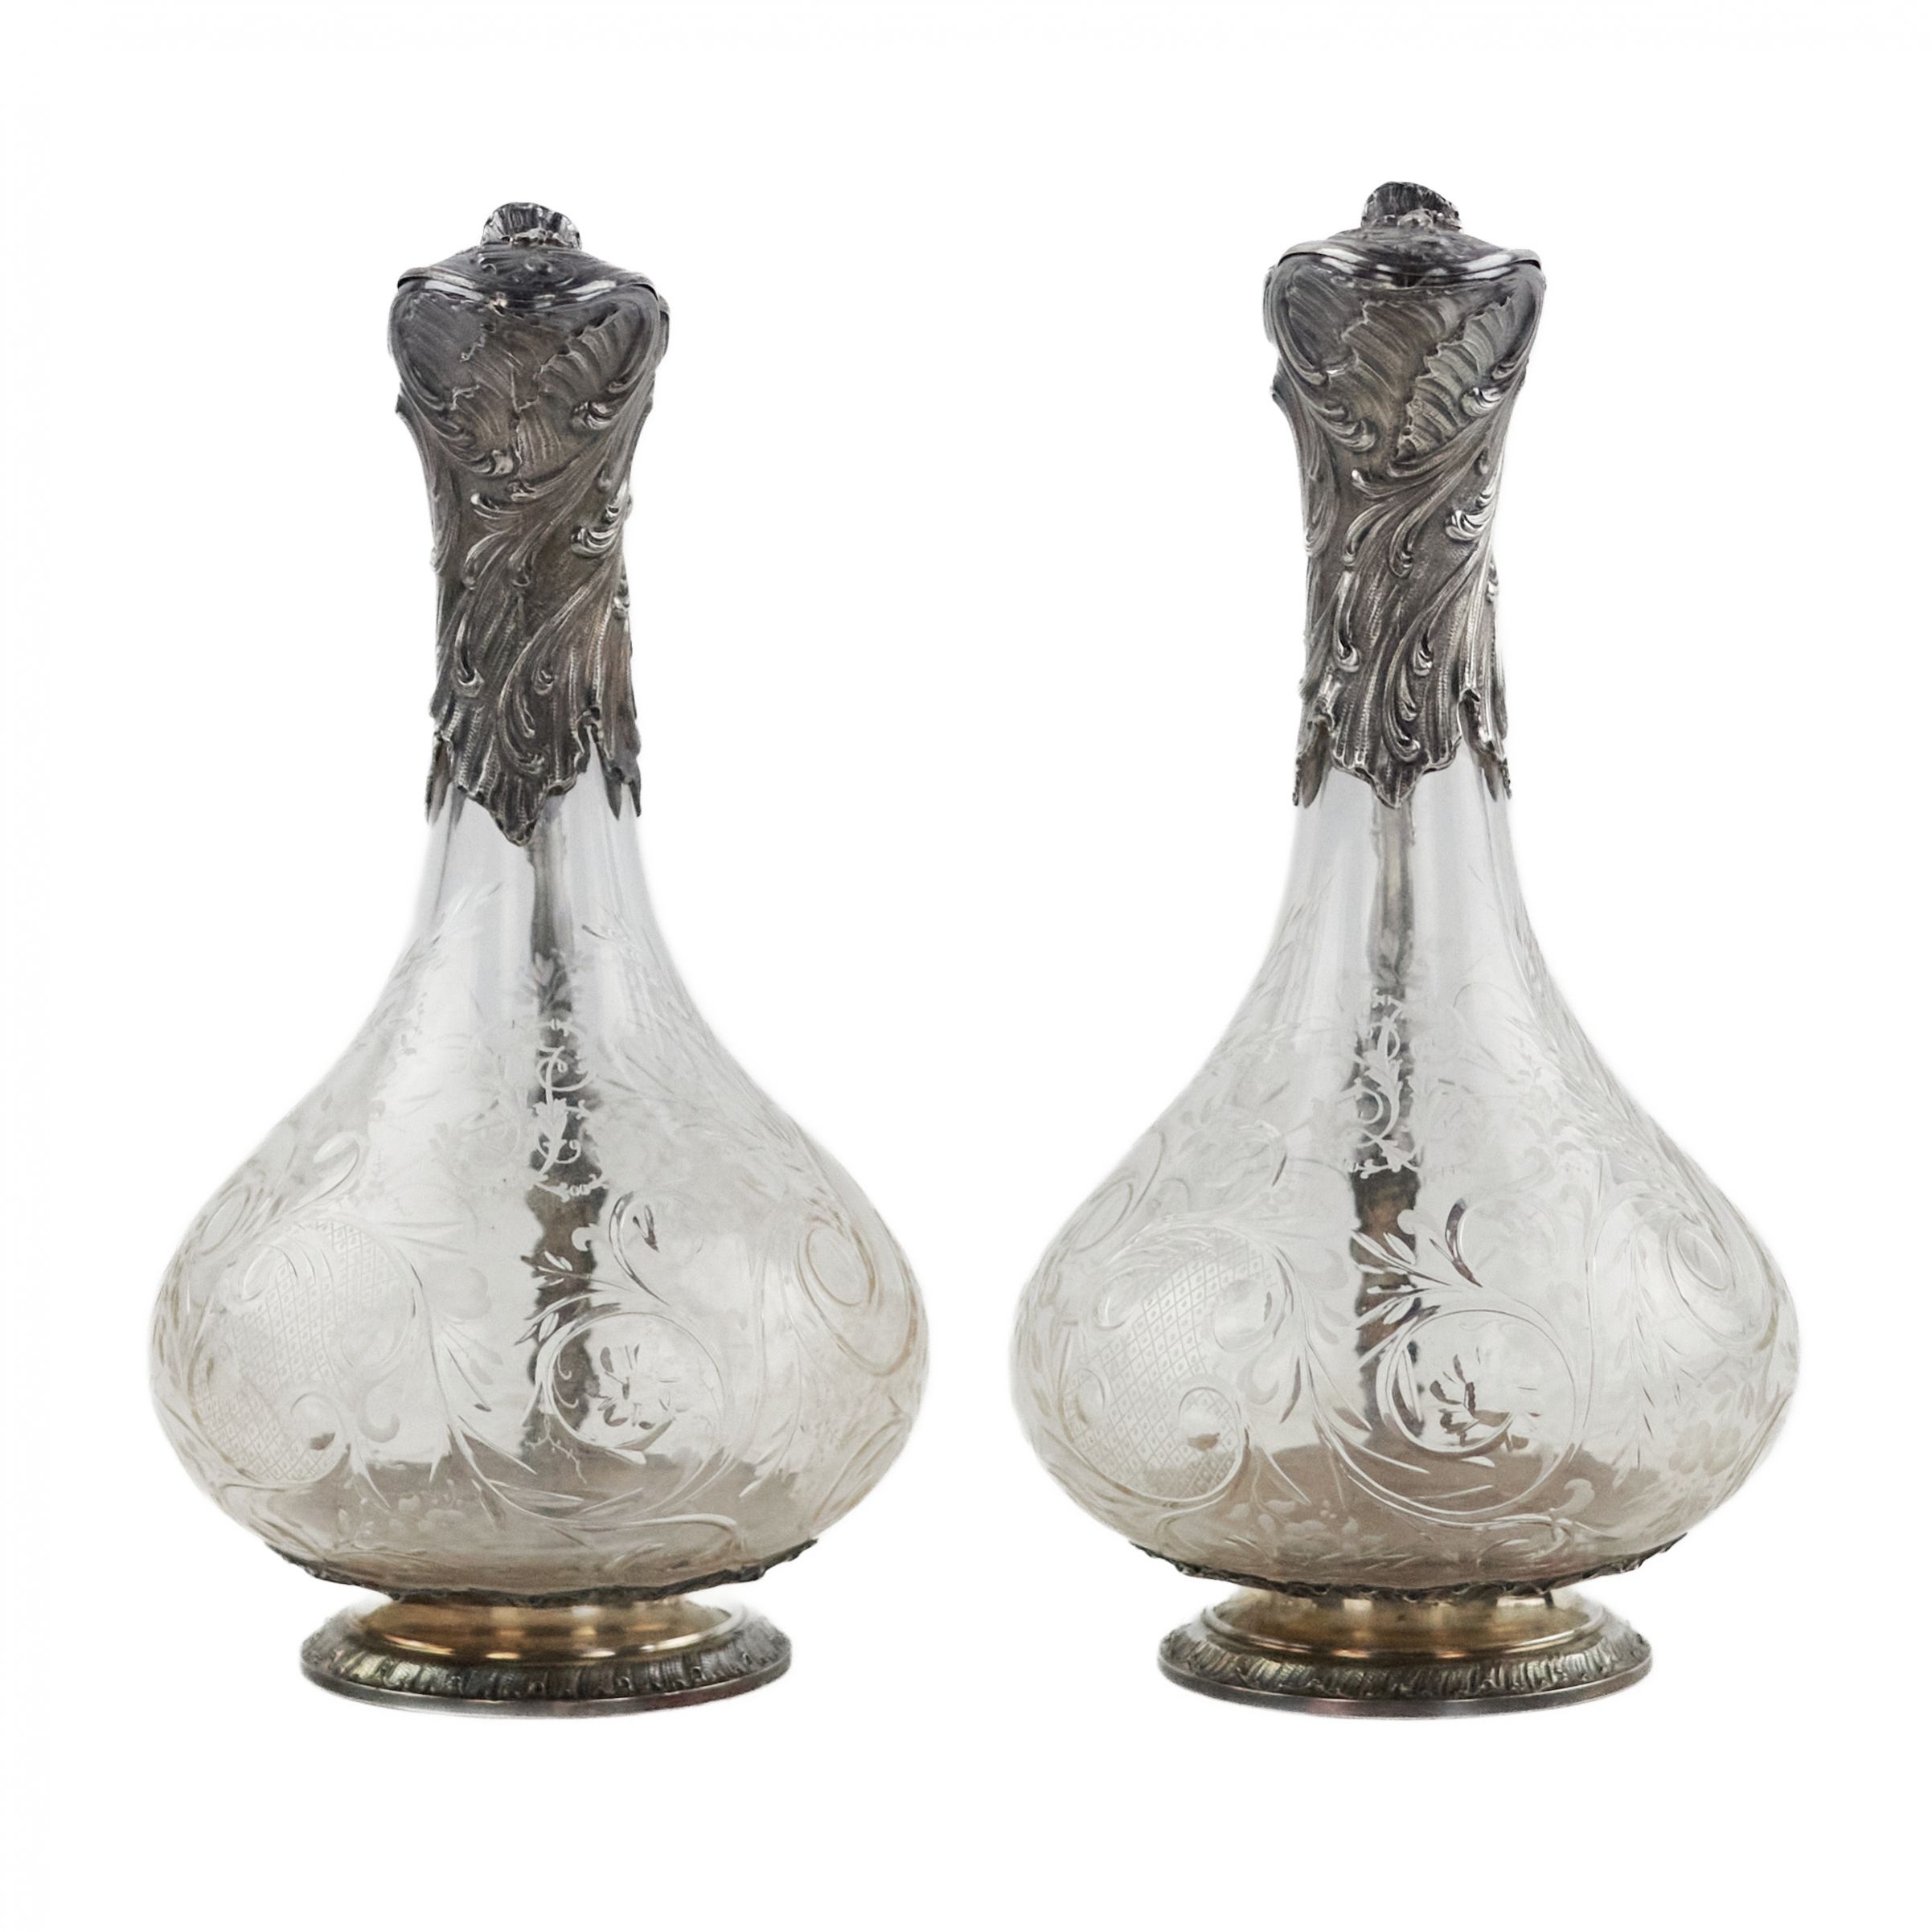 Pair of wine glass jugs in silver, Louis XV style, turn of the 19th-20th centuries. - Image 2 of 8